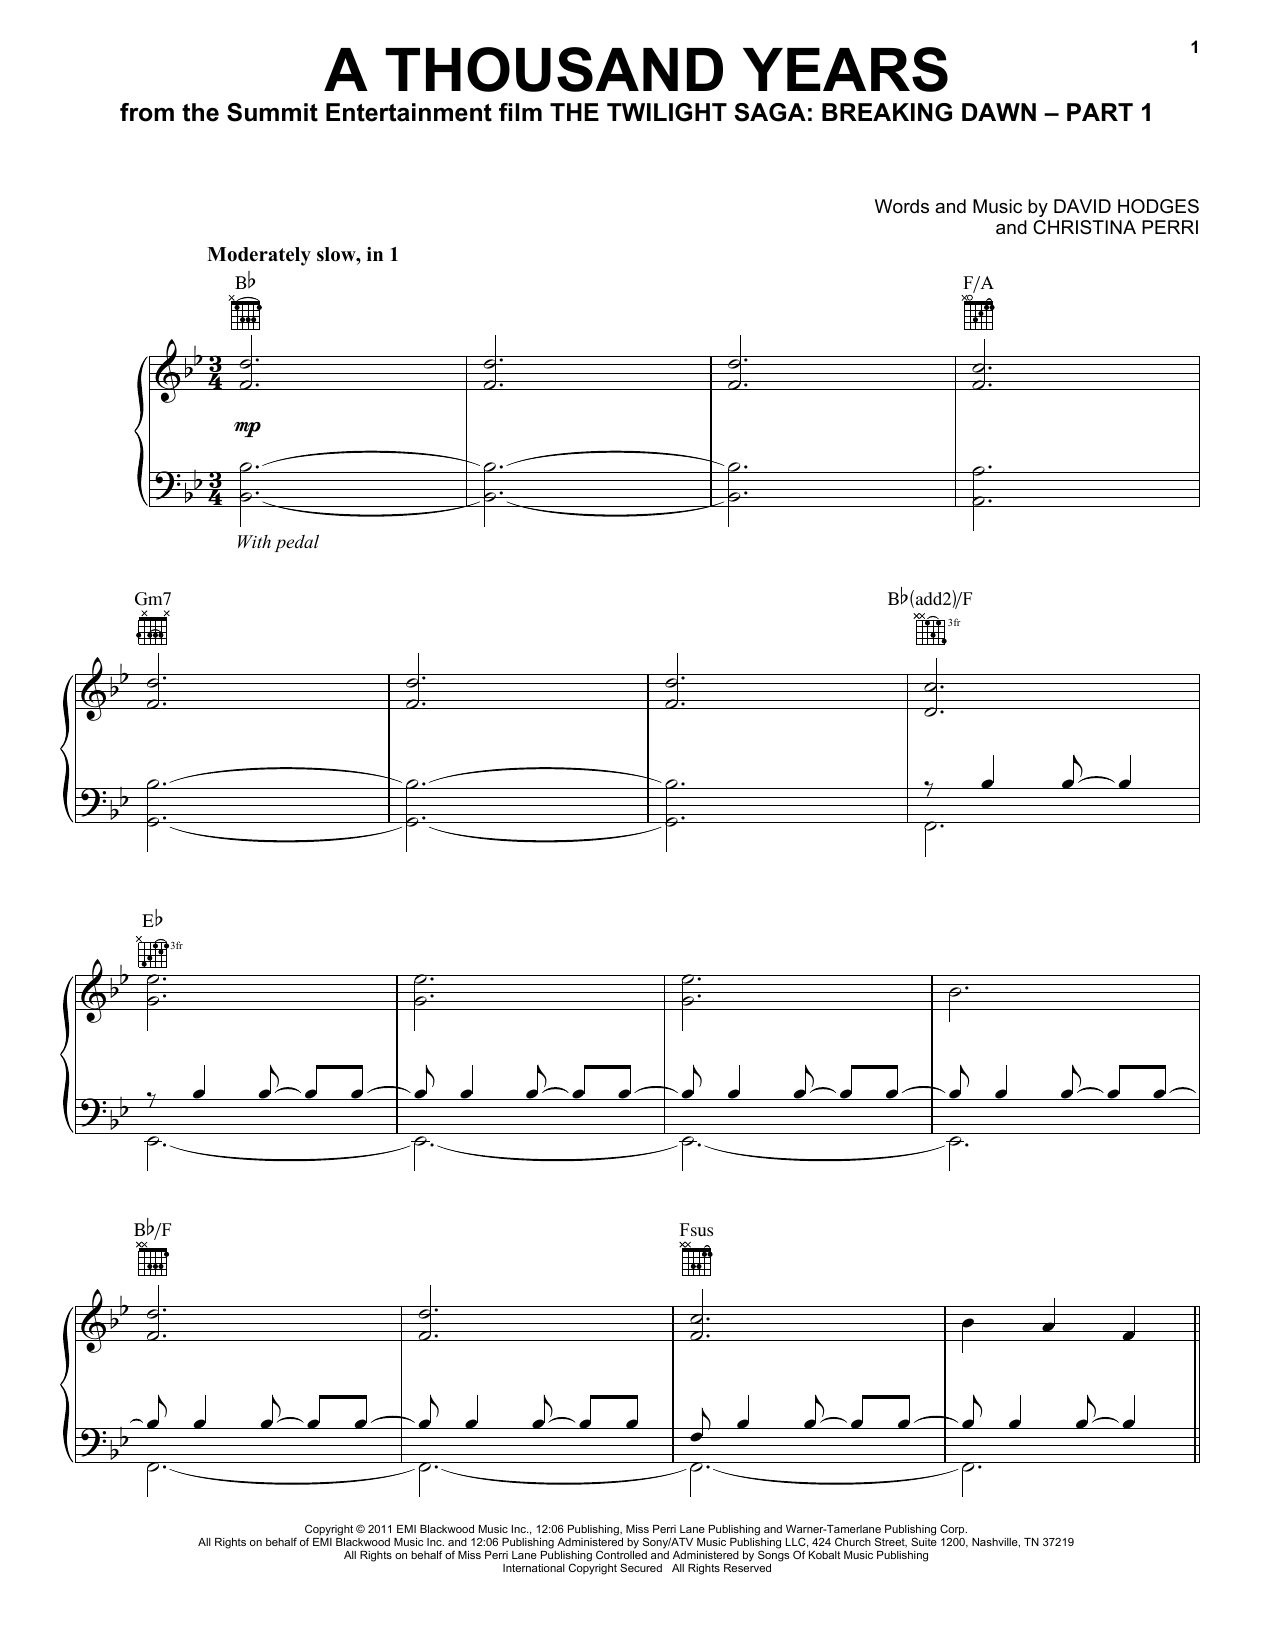 Christina Perri A Thousand Years sheet music notes and chords. Download Printable PDF.